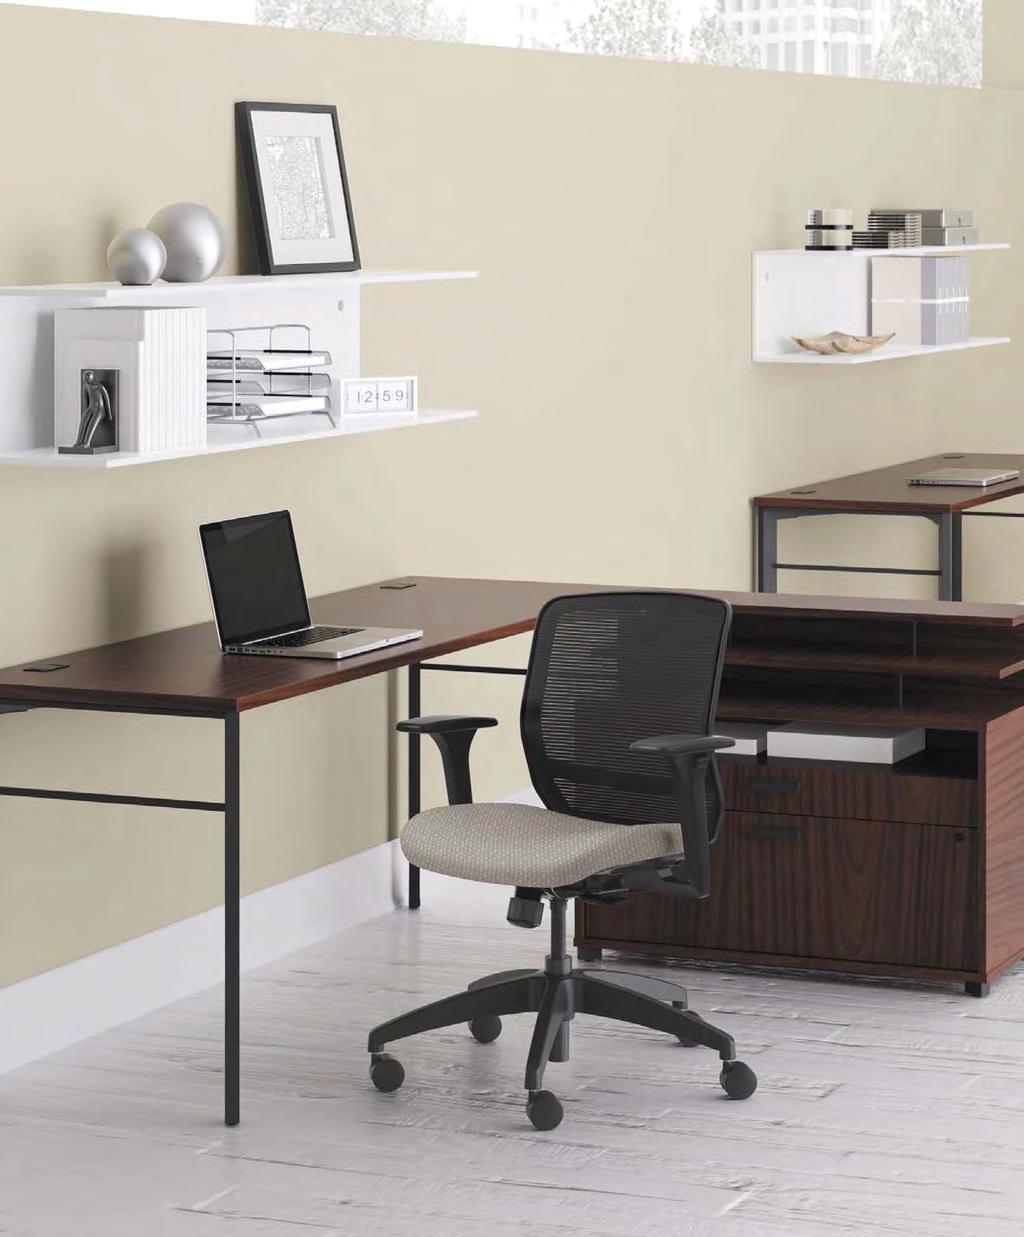 LAMINATE DESKS Manage and Quotient inspired by